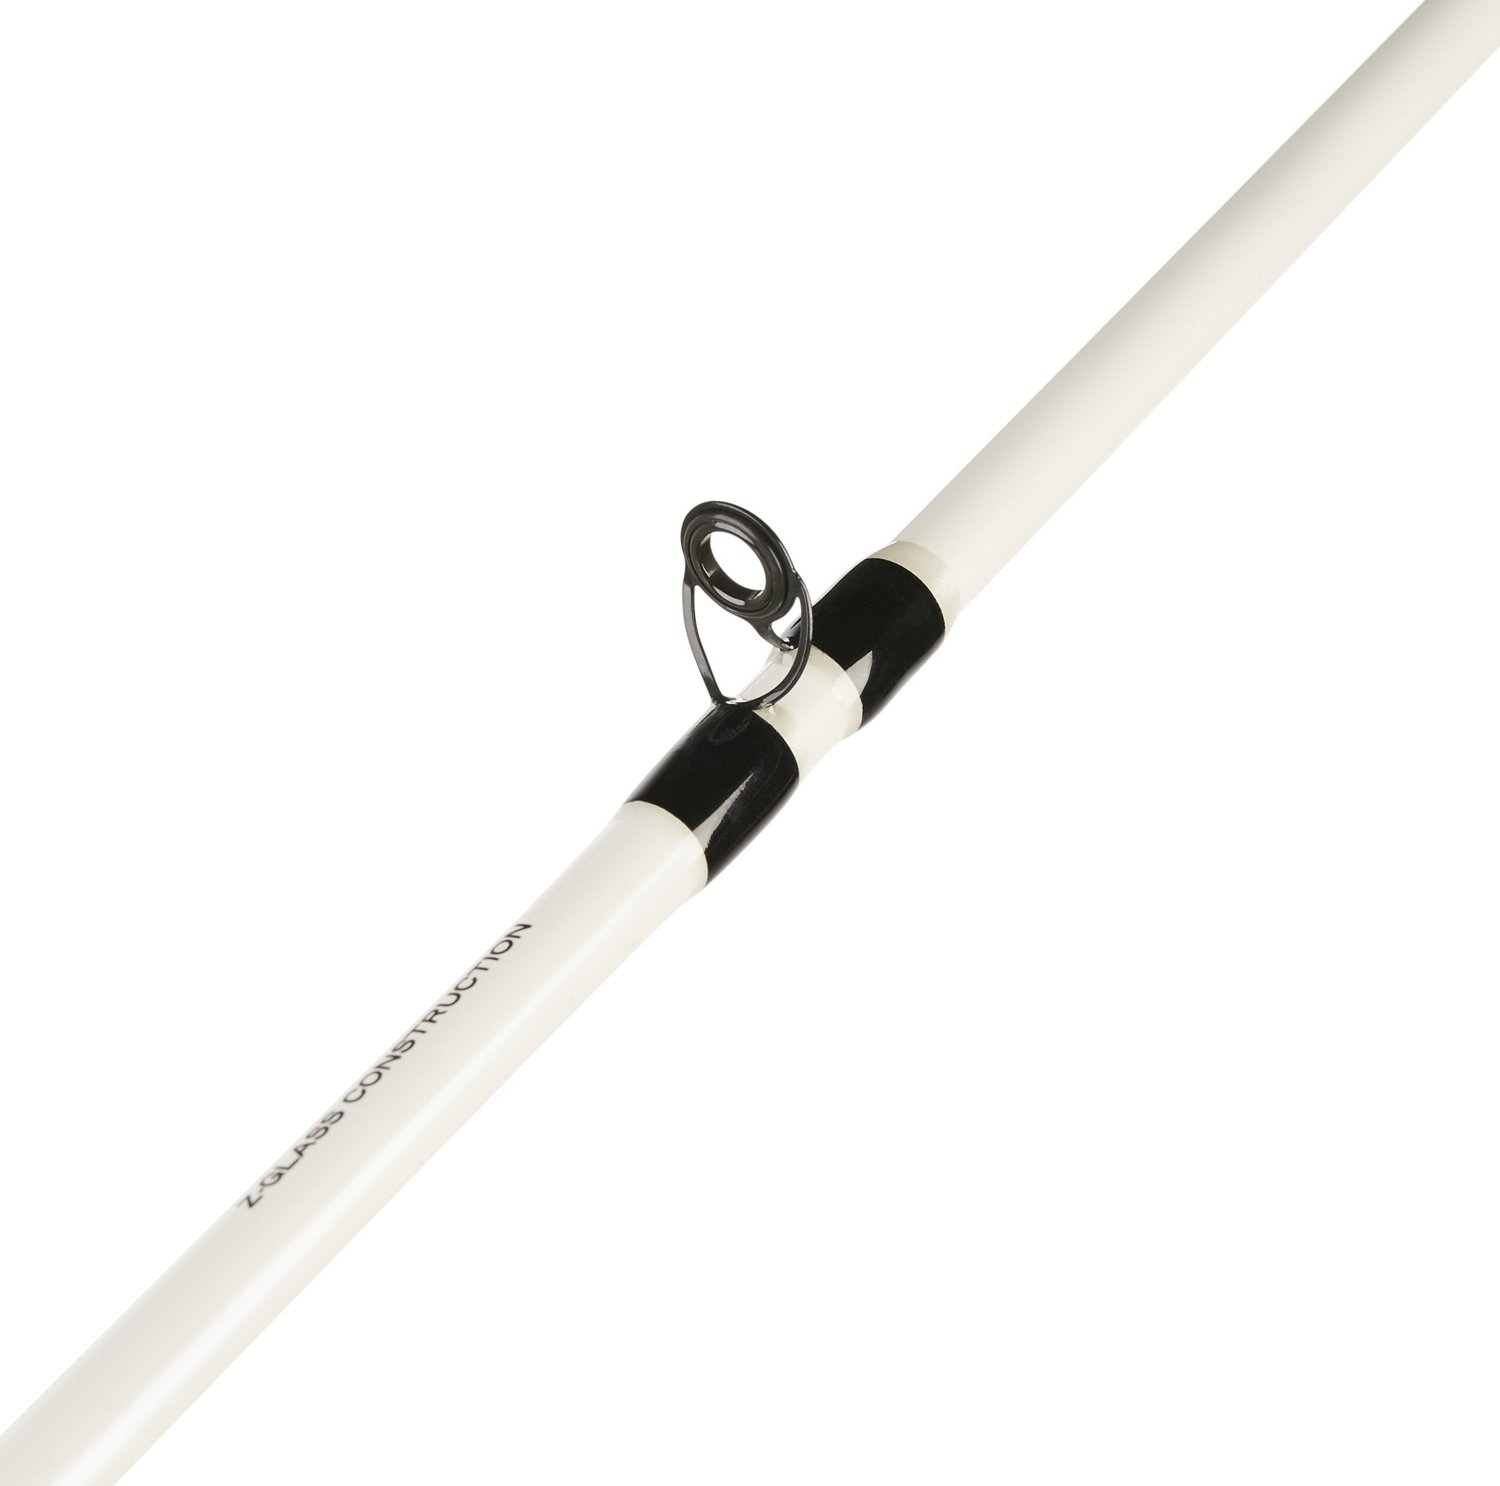 Zebco 606 Freshwater Spincast Rod and Reel Combo